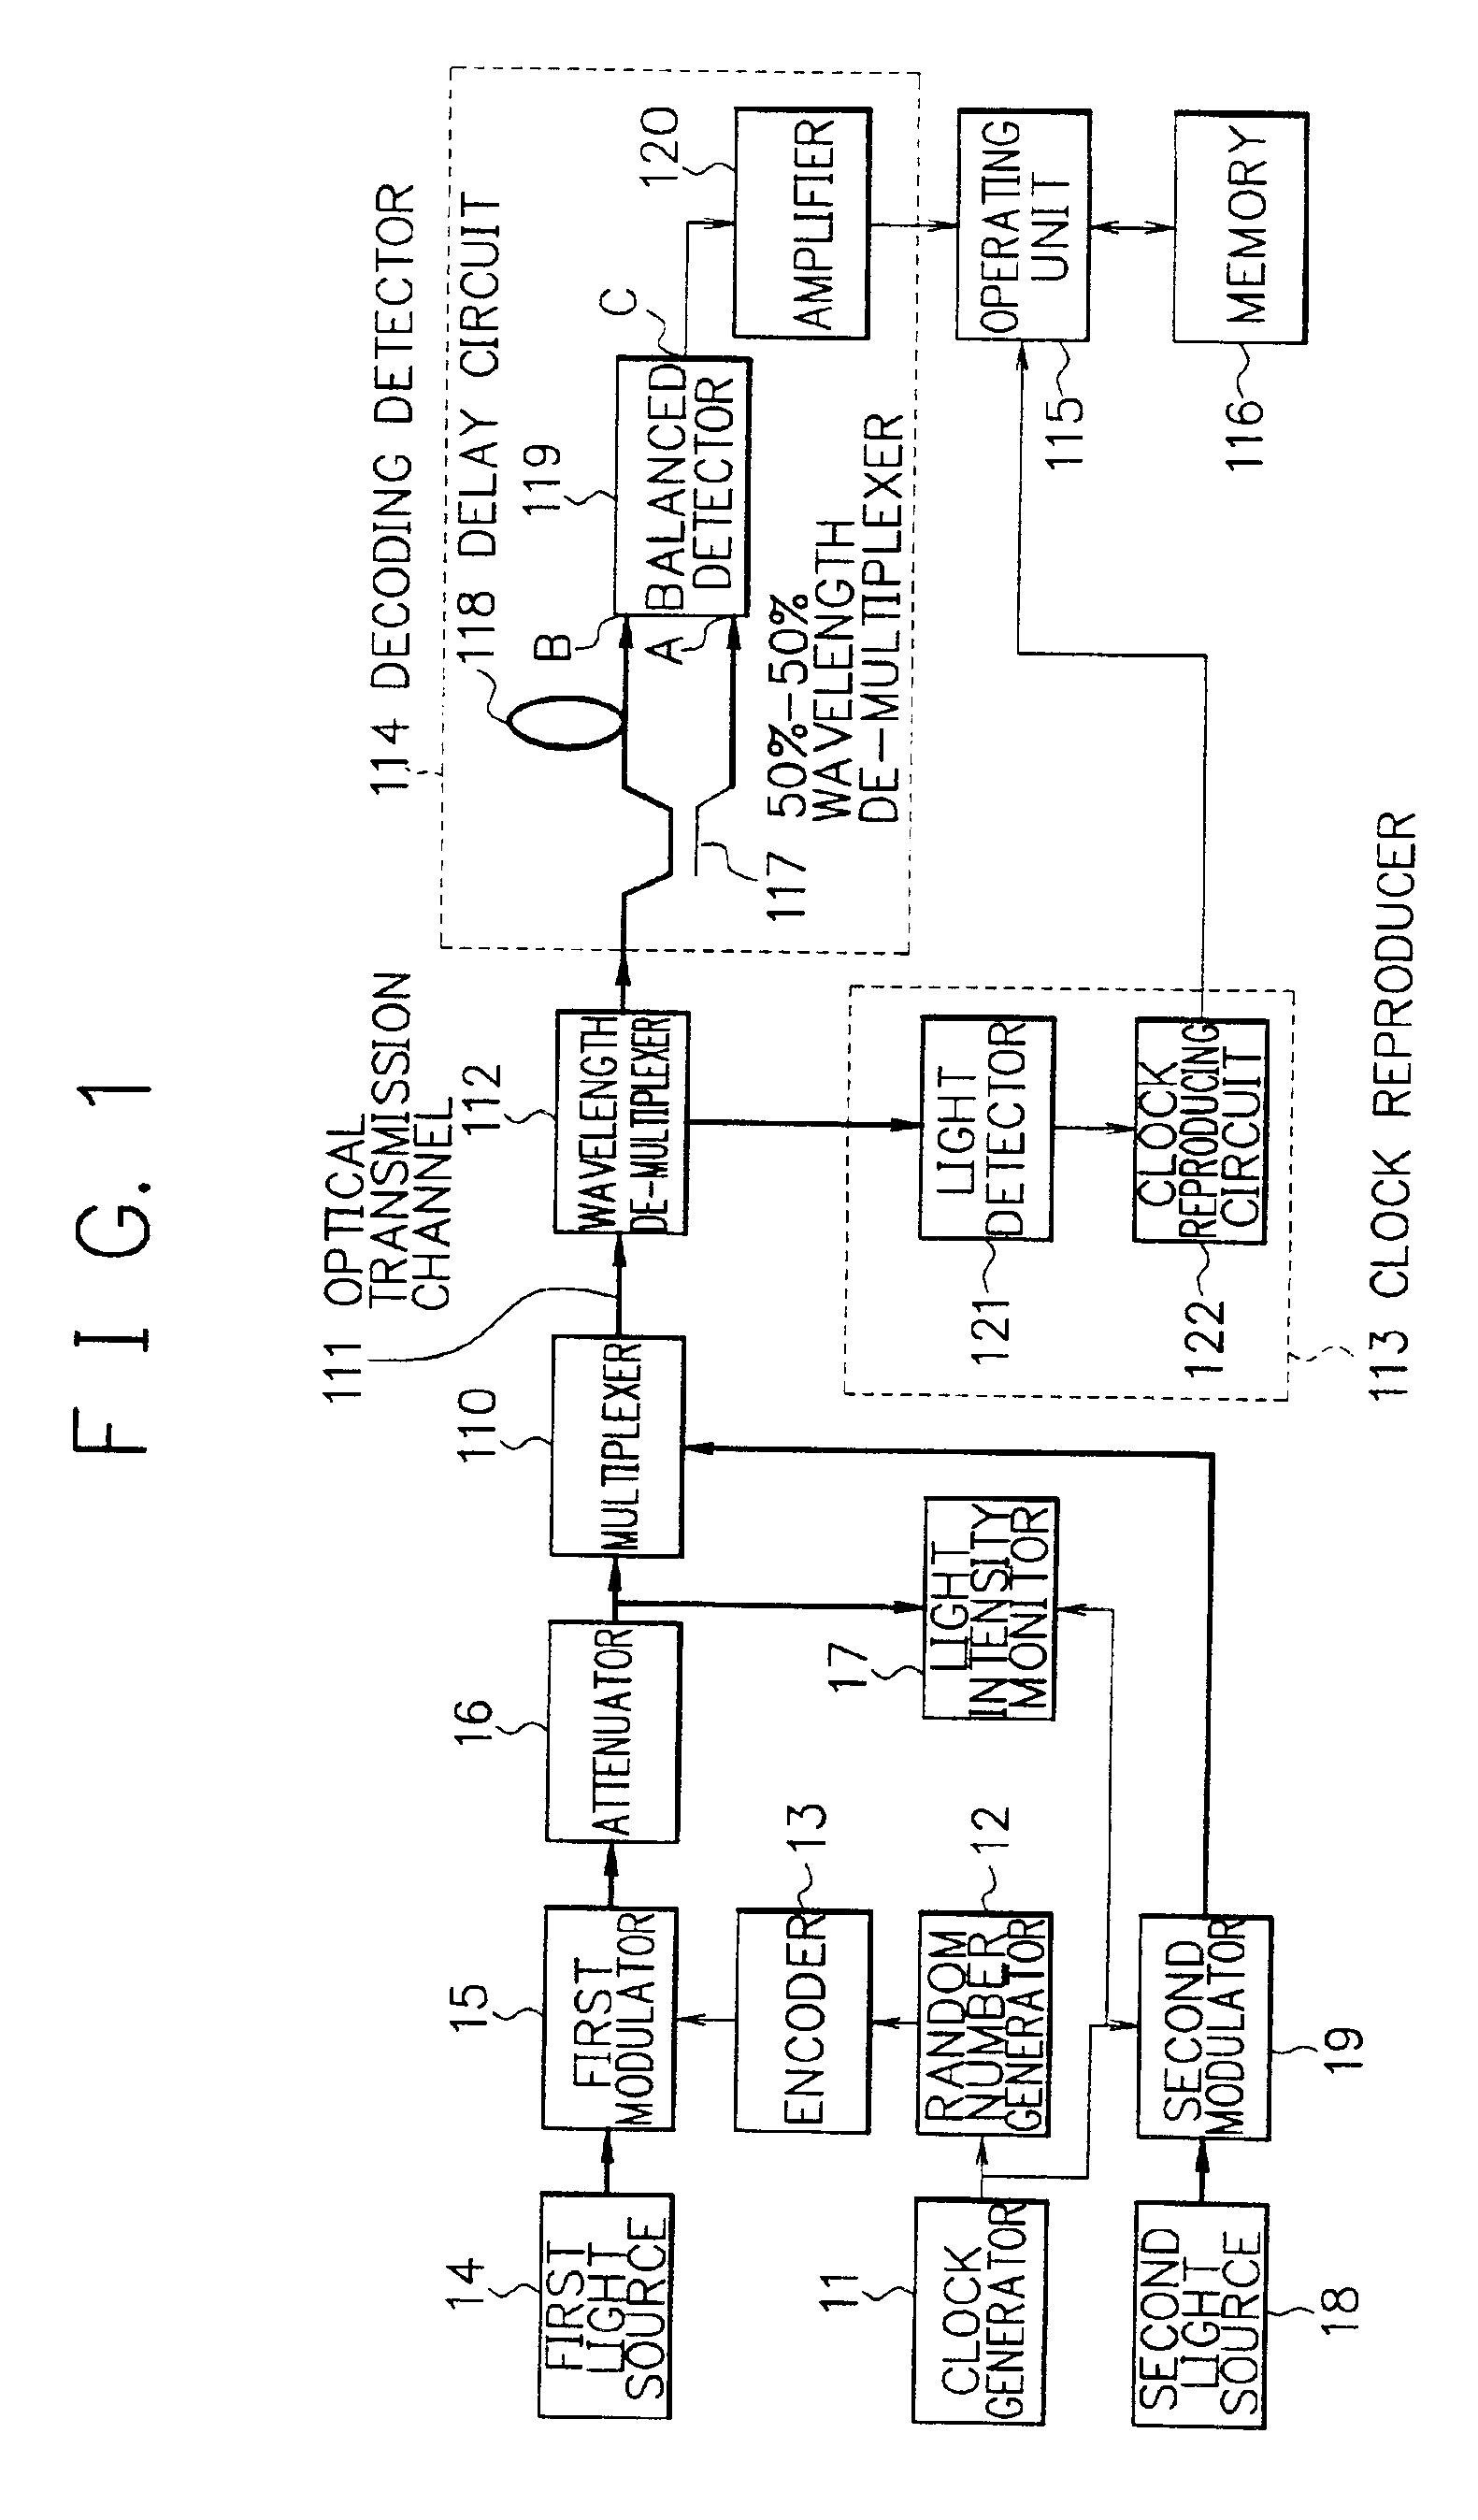 Cryptographic key distribution method and apparatus thereof